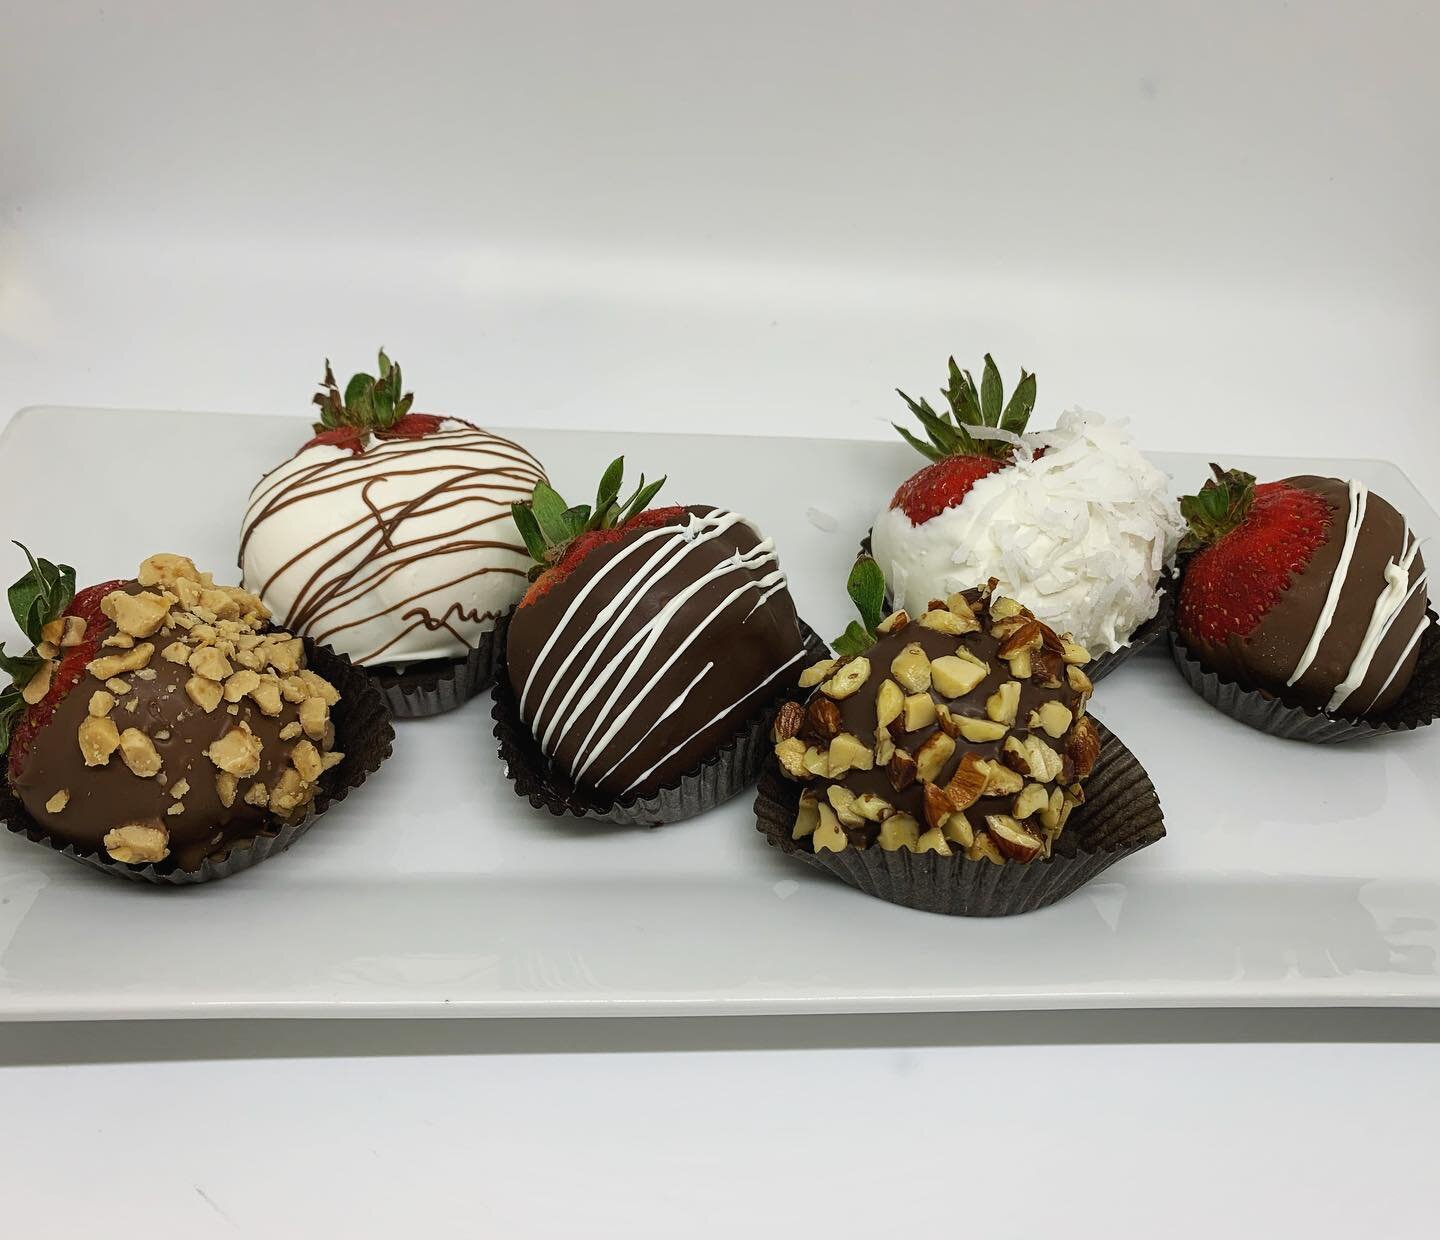 Fancy dipped strawberries! 🍓White chocolate with coconut, chocolate with toffee, chocolate with nuts, zebra stripped, and more. 

#chocolatecoveredstrawberries #fancydippedstrawberries #sierranevadachocolateco #midtownreno #renonevada #foodphotograp